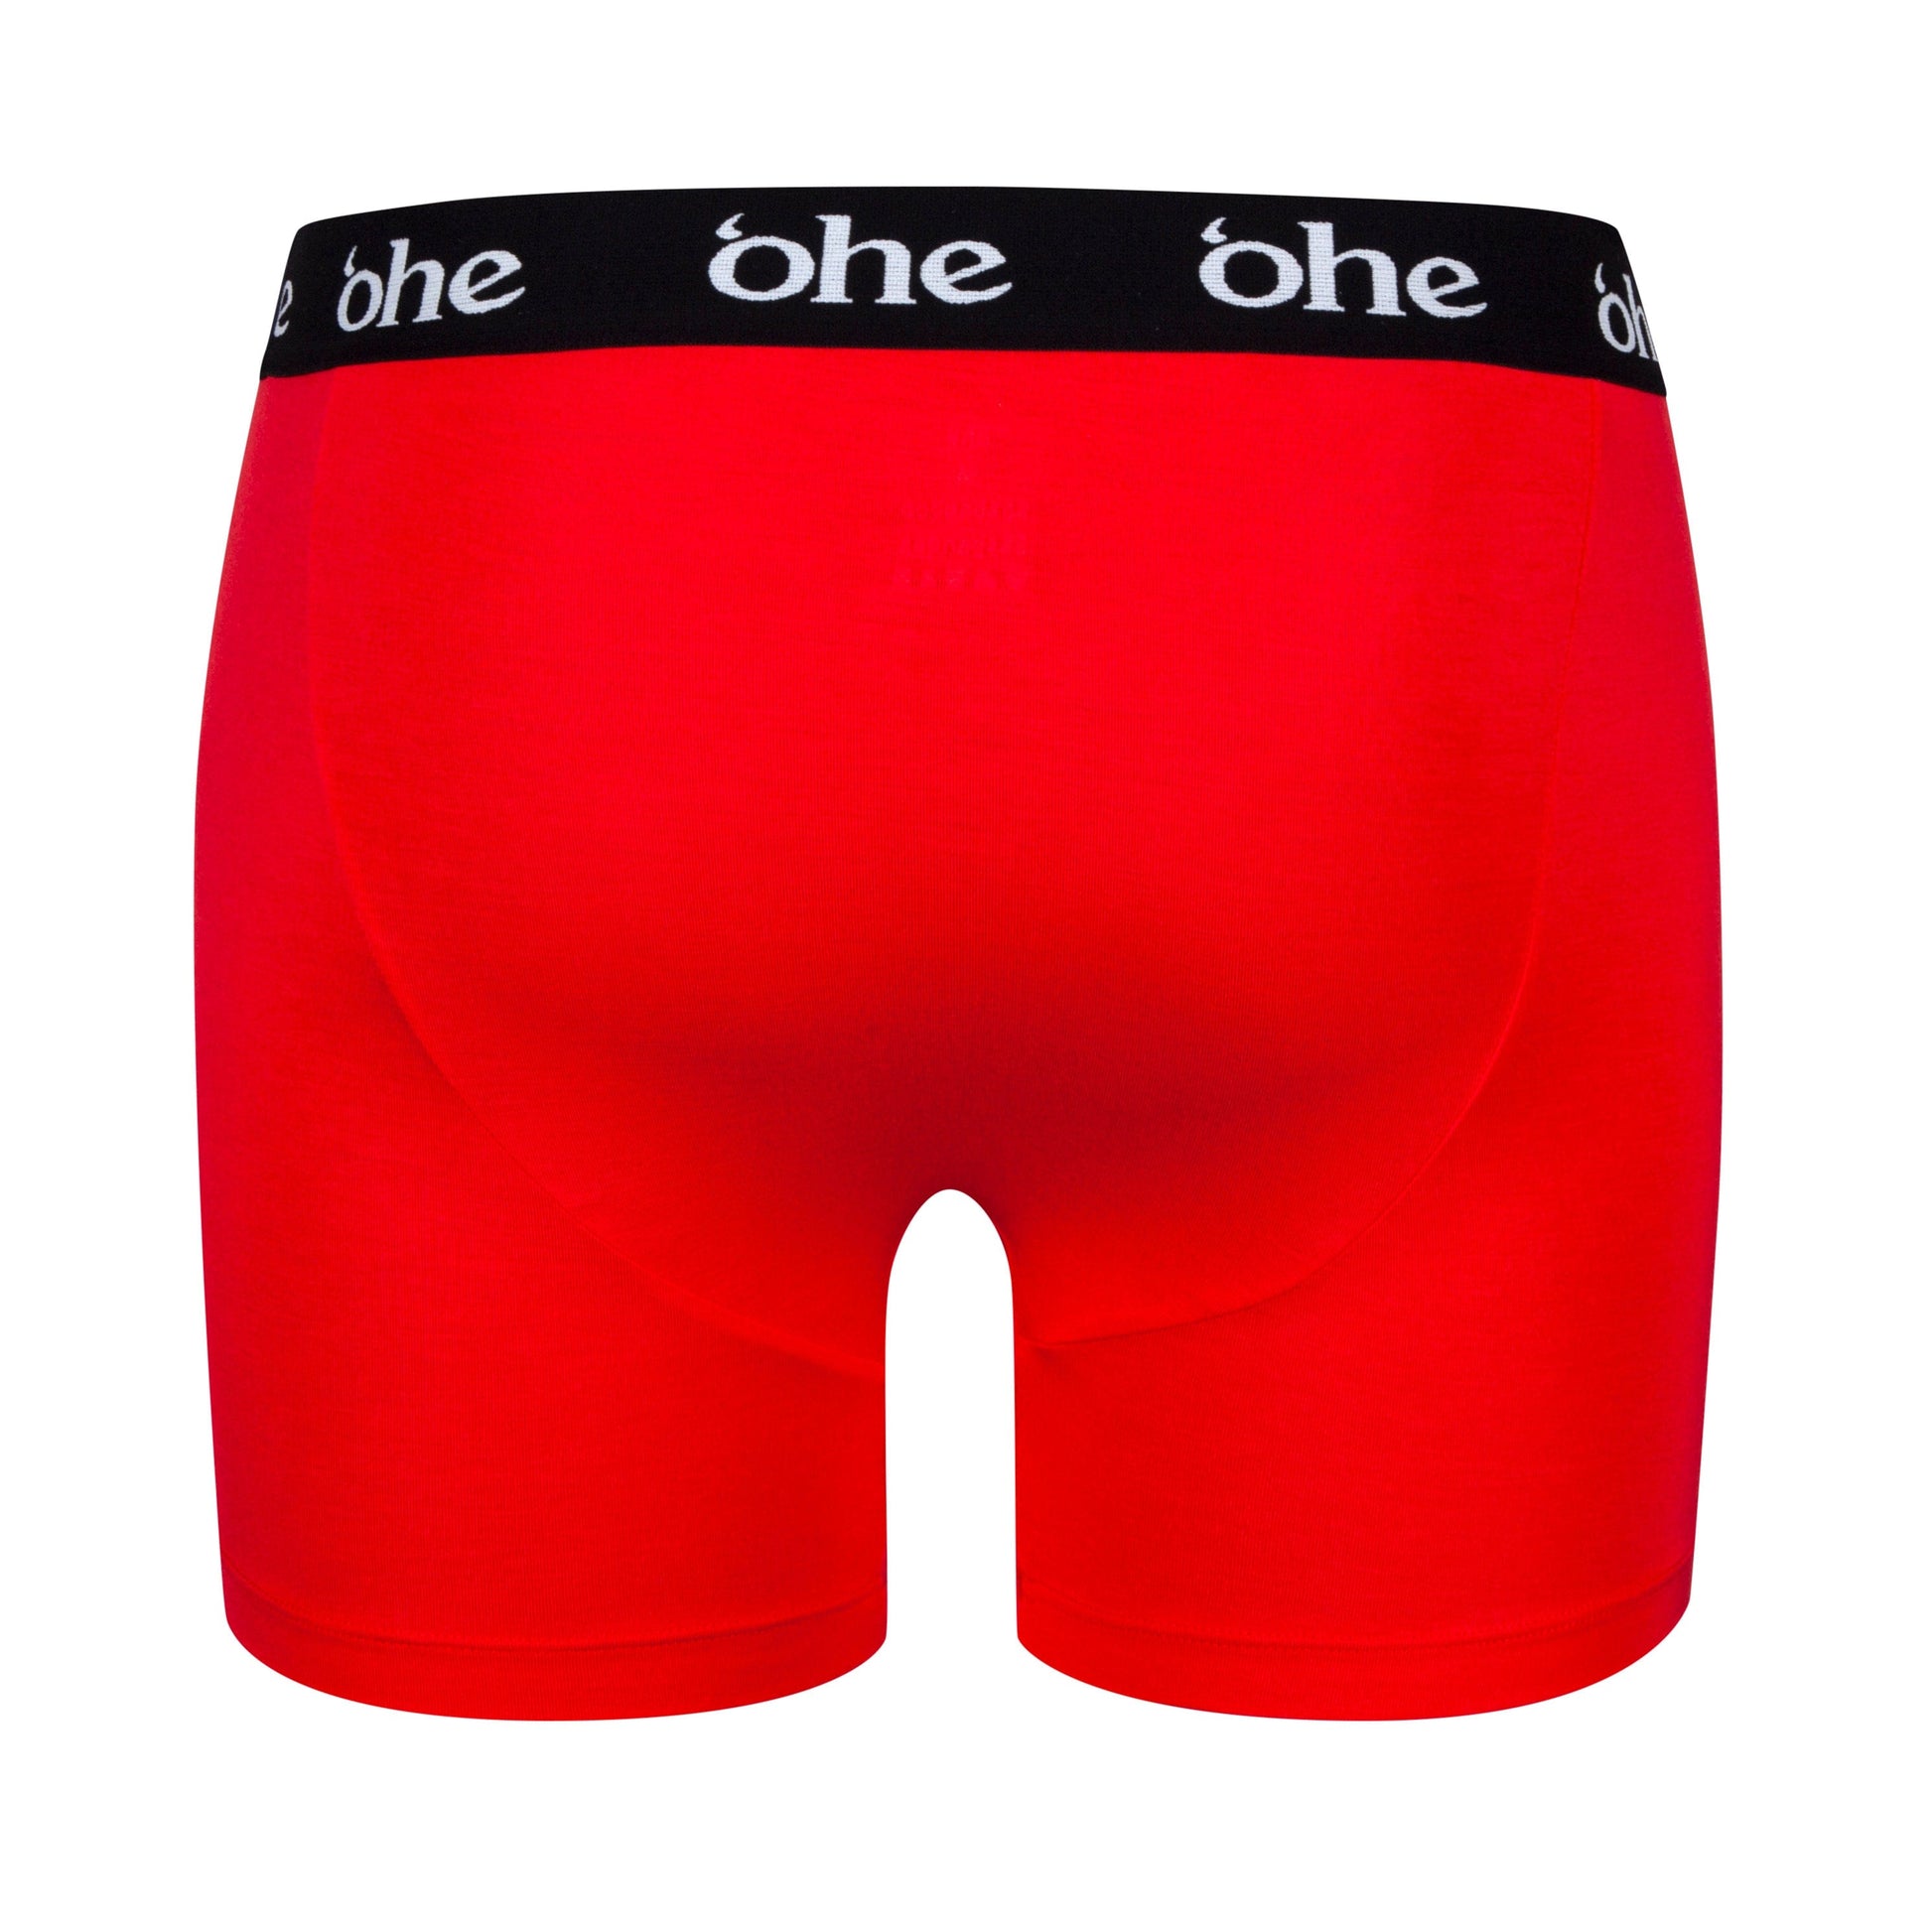 Back view of red men's bamboo underwear boxer shorts with black waist band and white 'ohe logo